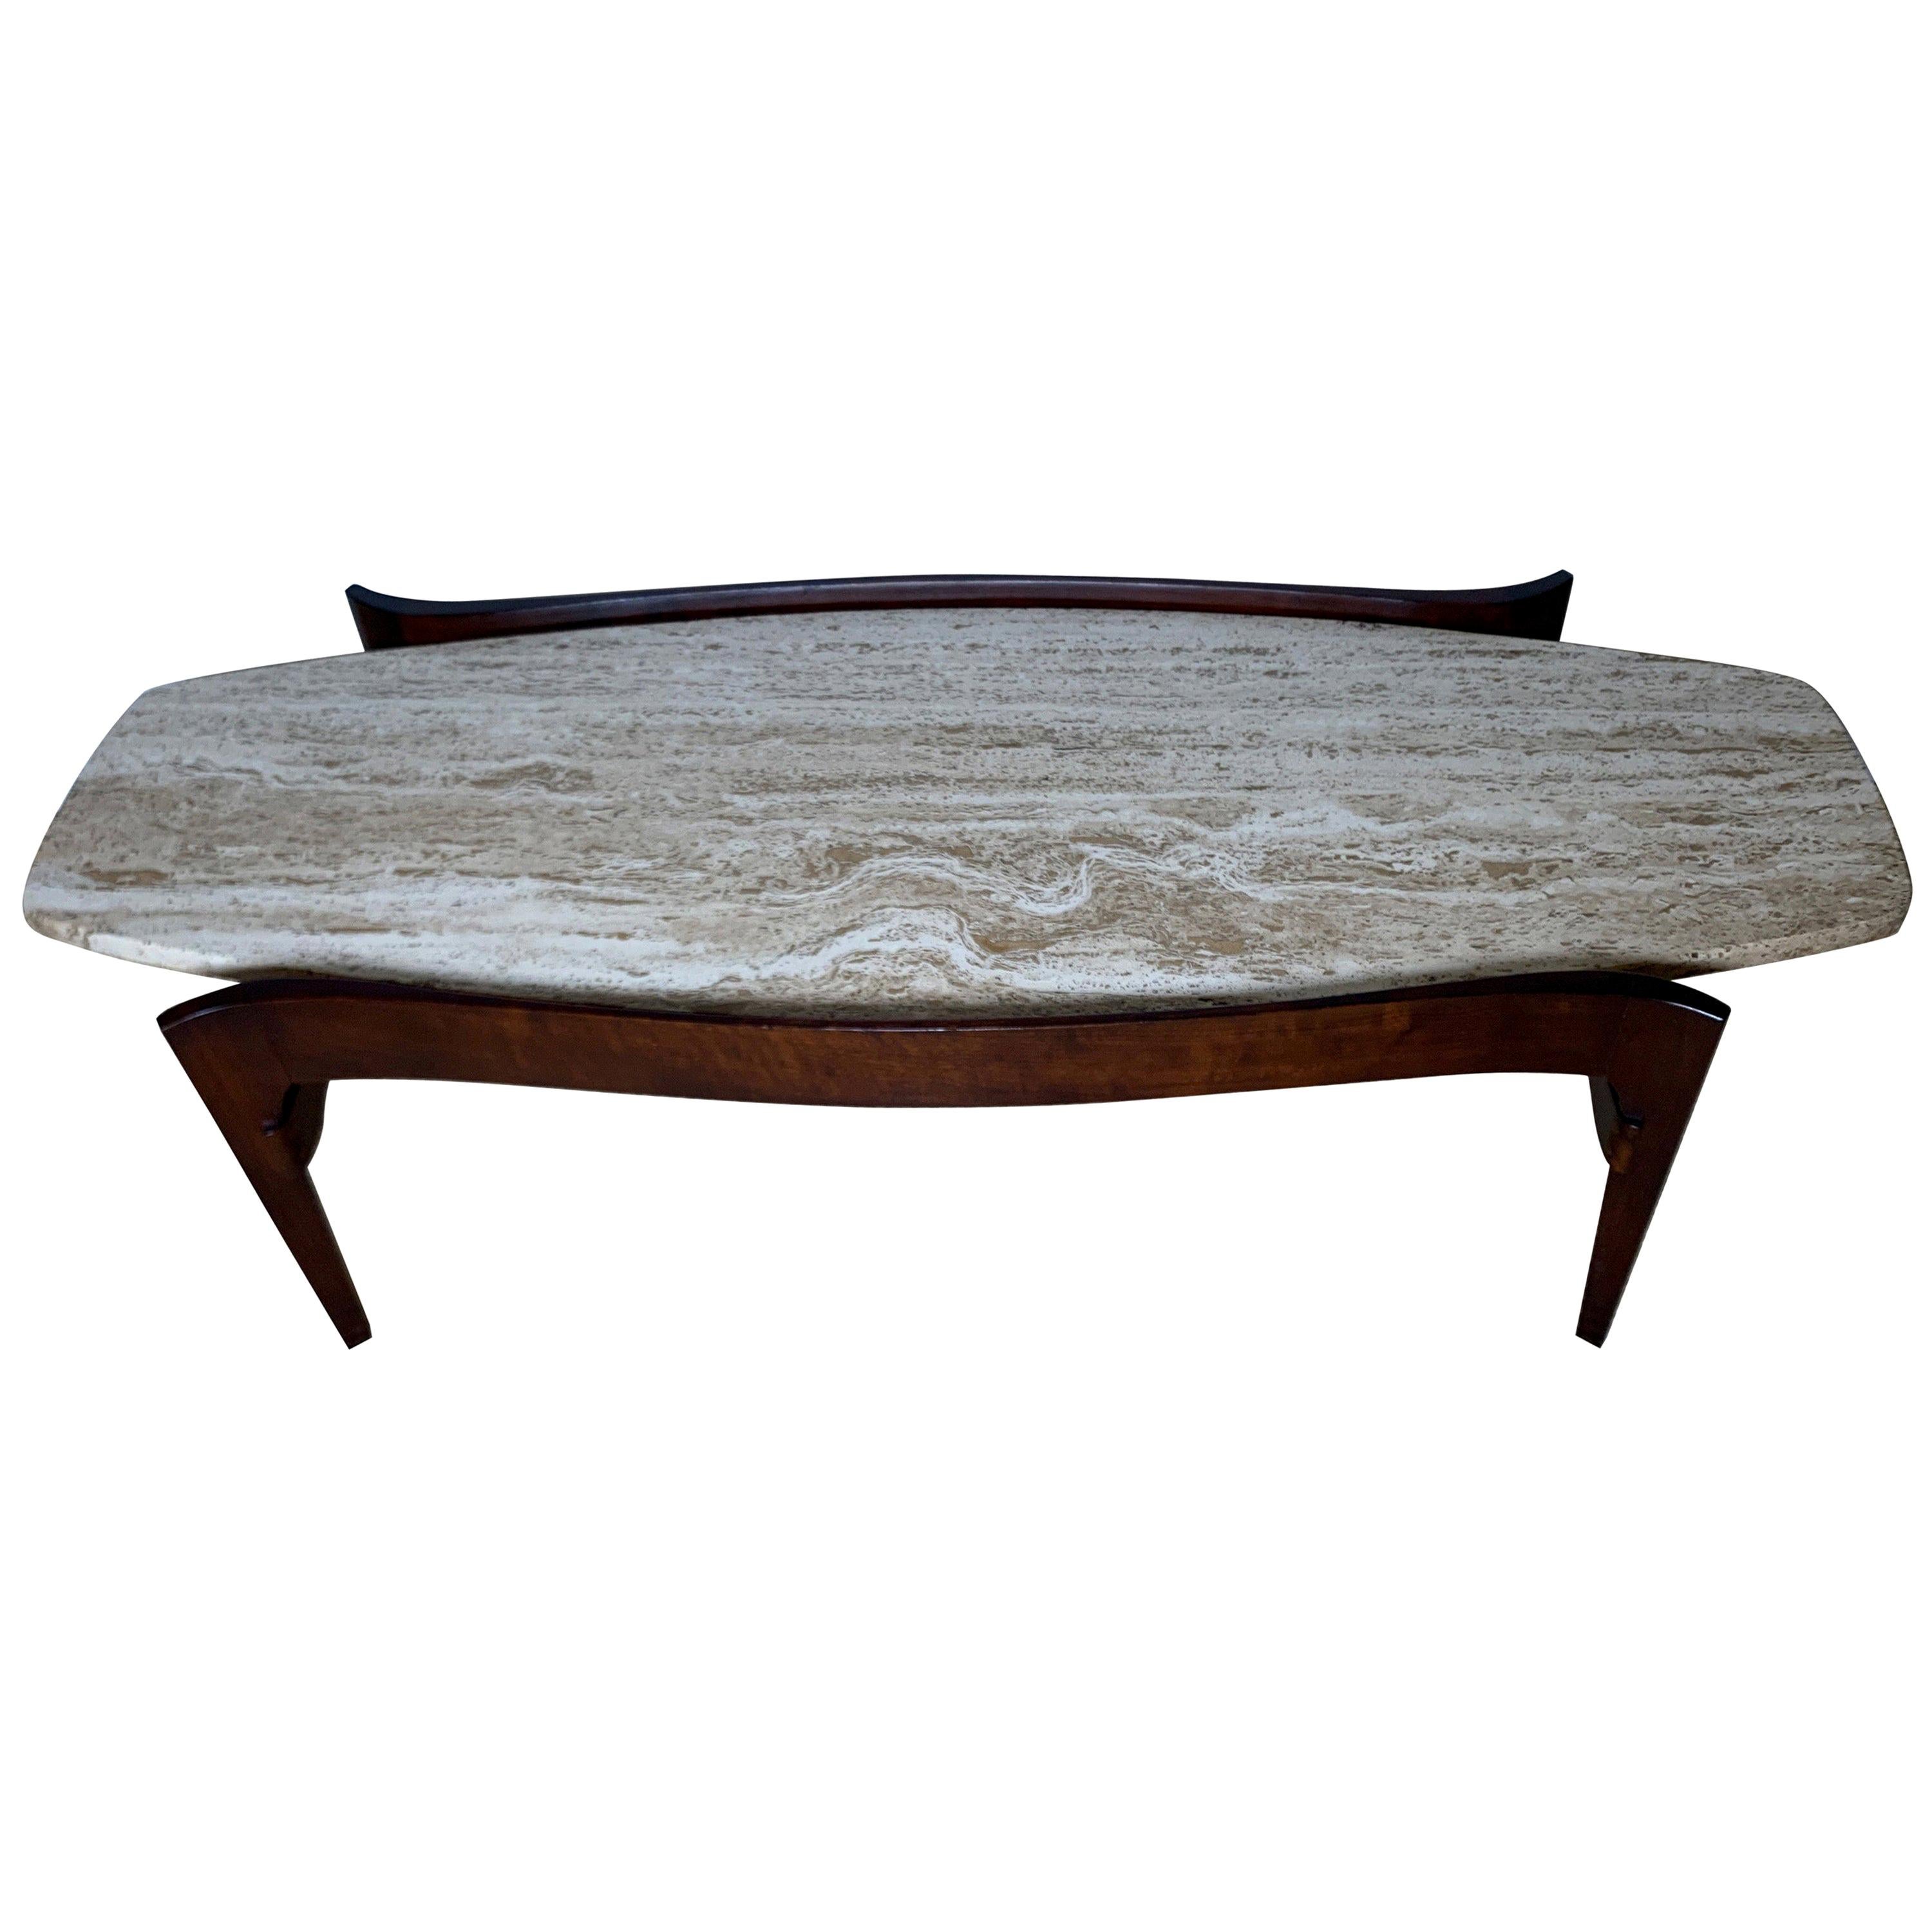 Bertha Schaefer for M. Singer & Sons Walnut and Travertine Coffee Table